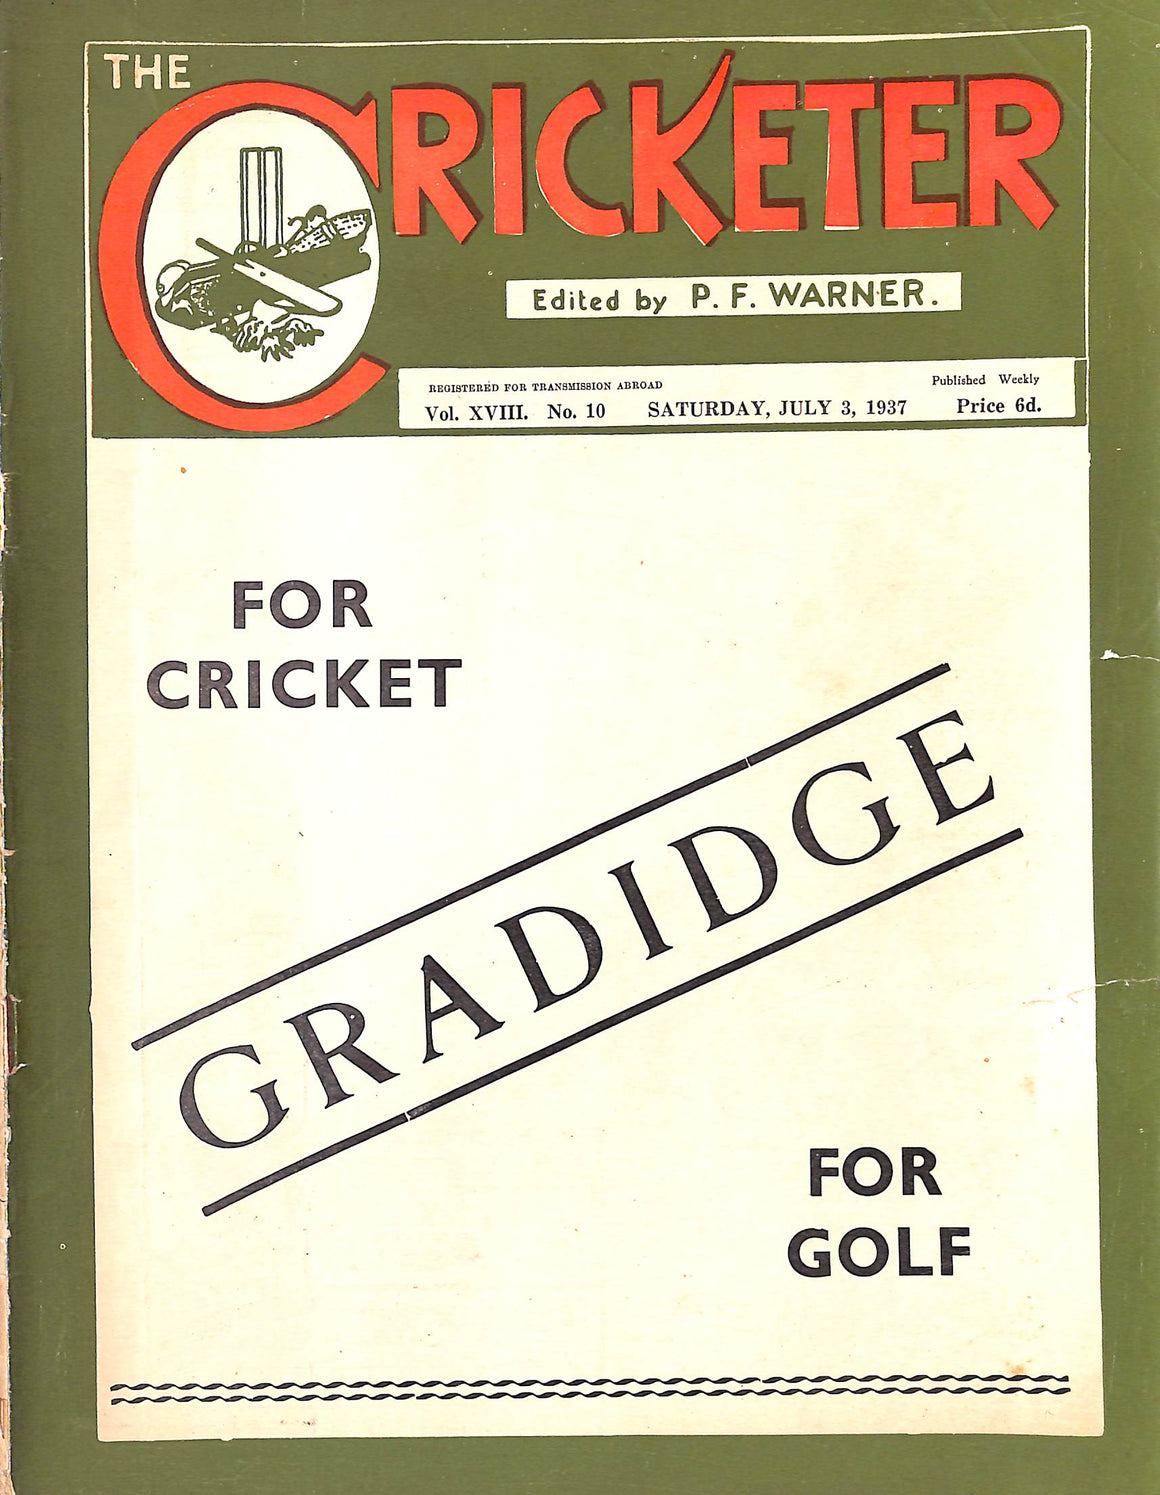 The Cricketer - July 3, 1937